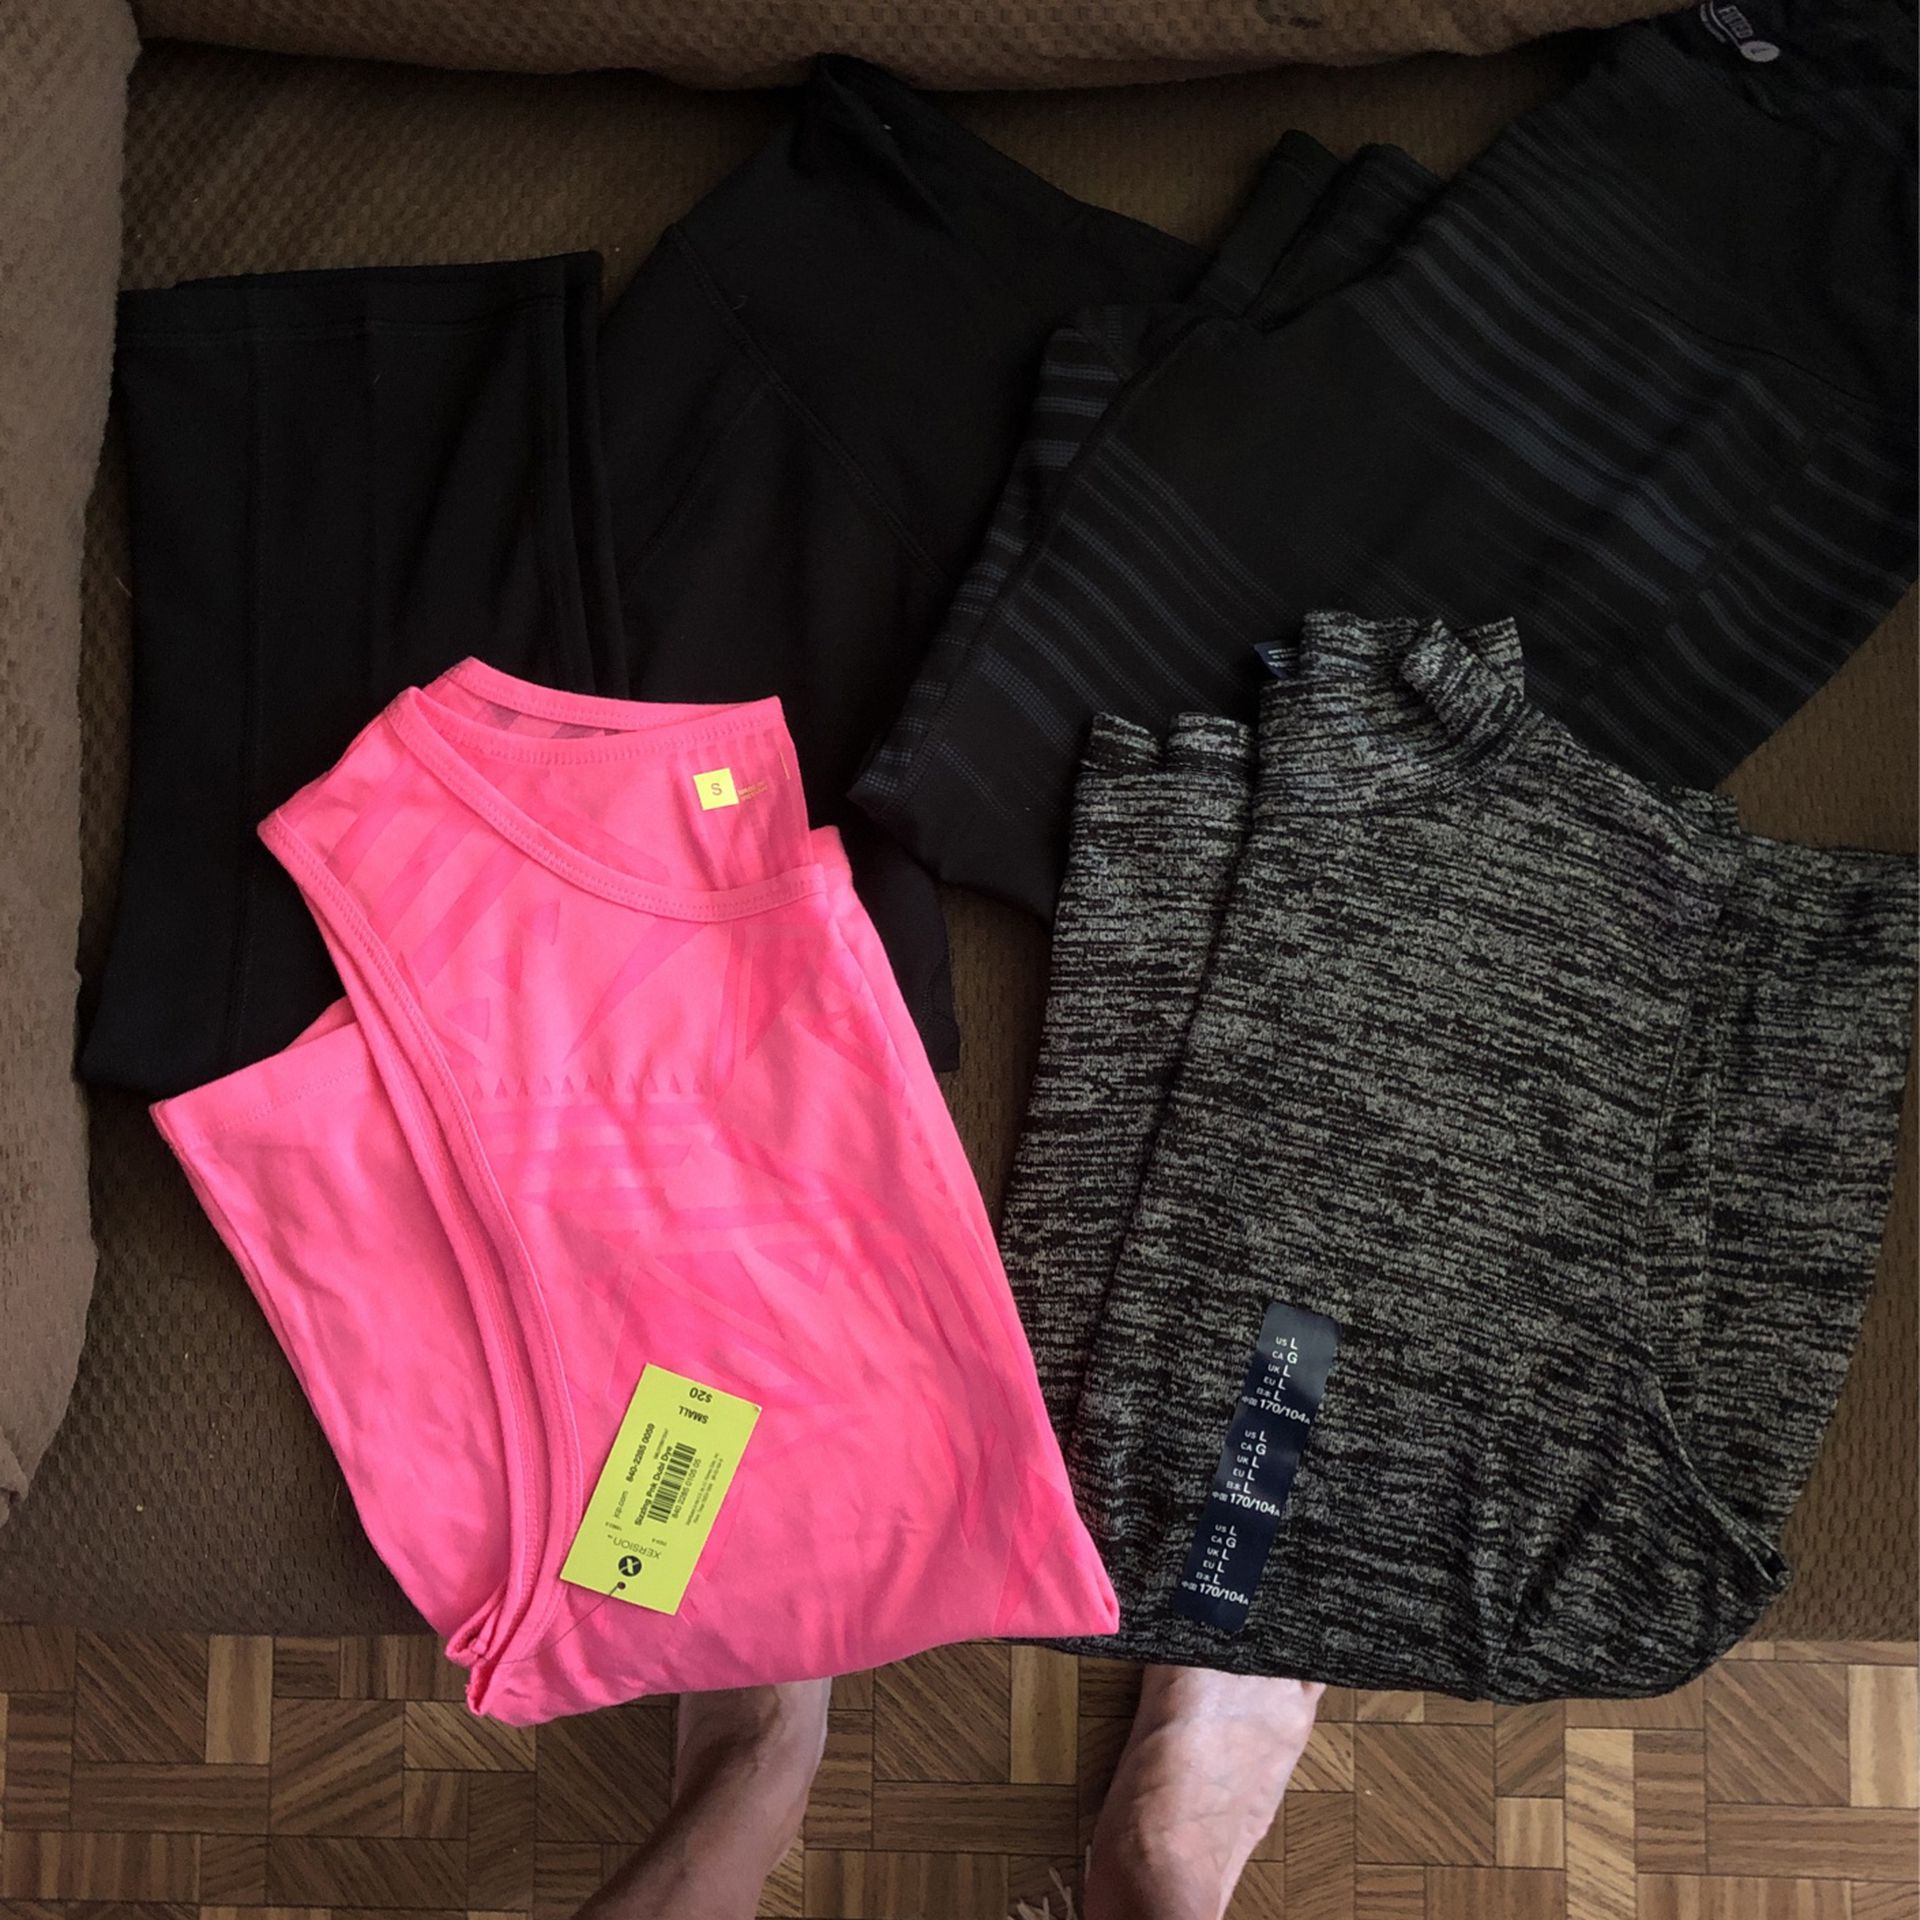 2 Exercise  Pants Lg, 2 New Tops 1 Lg , 1 Sm